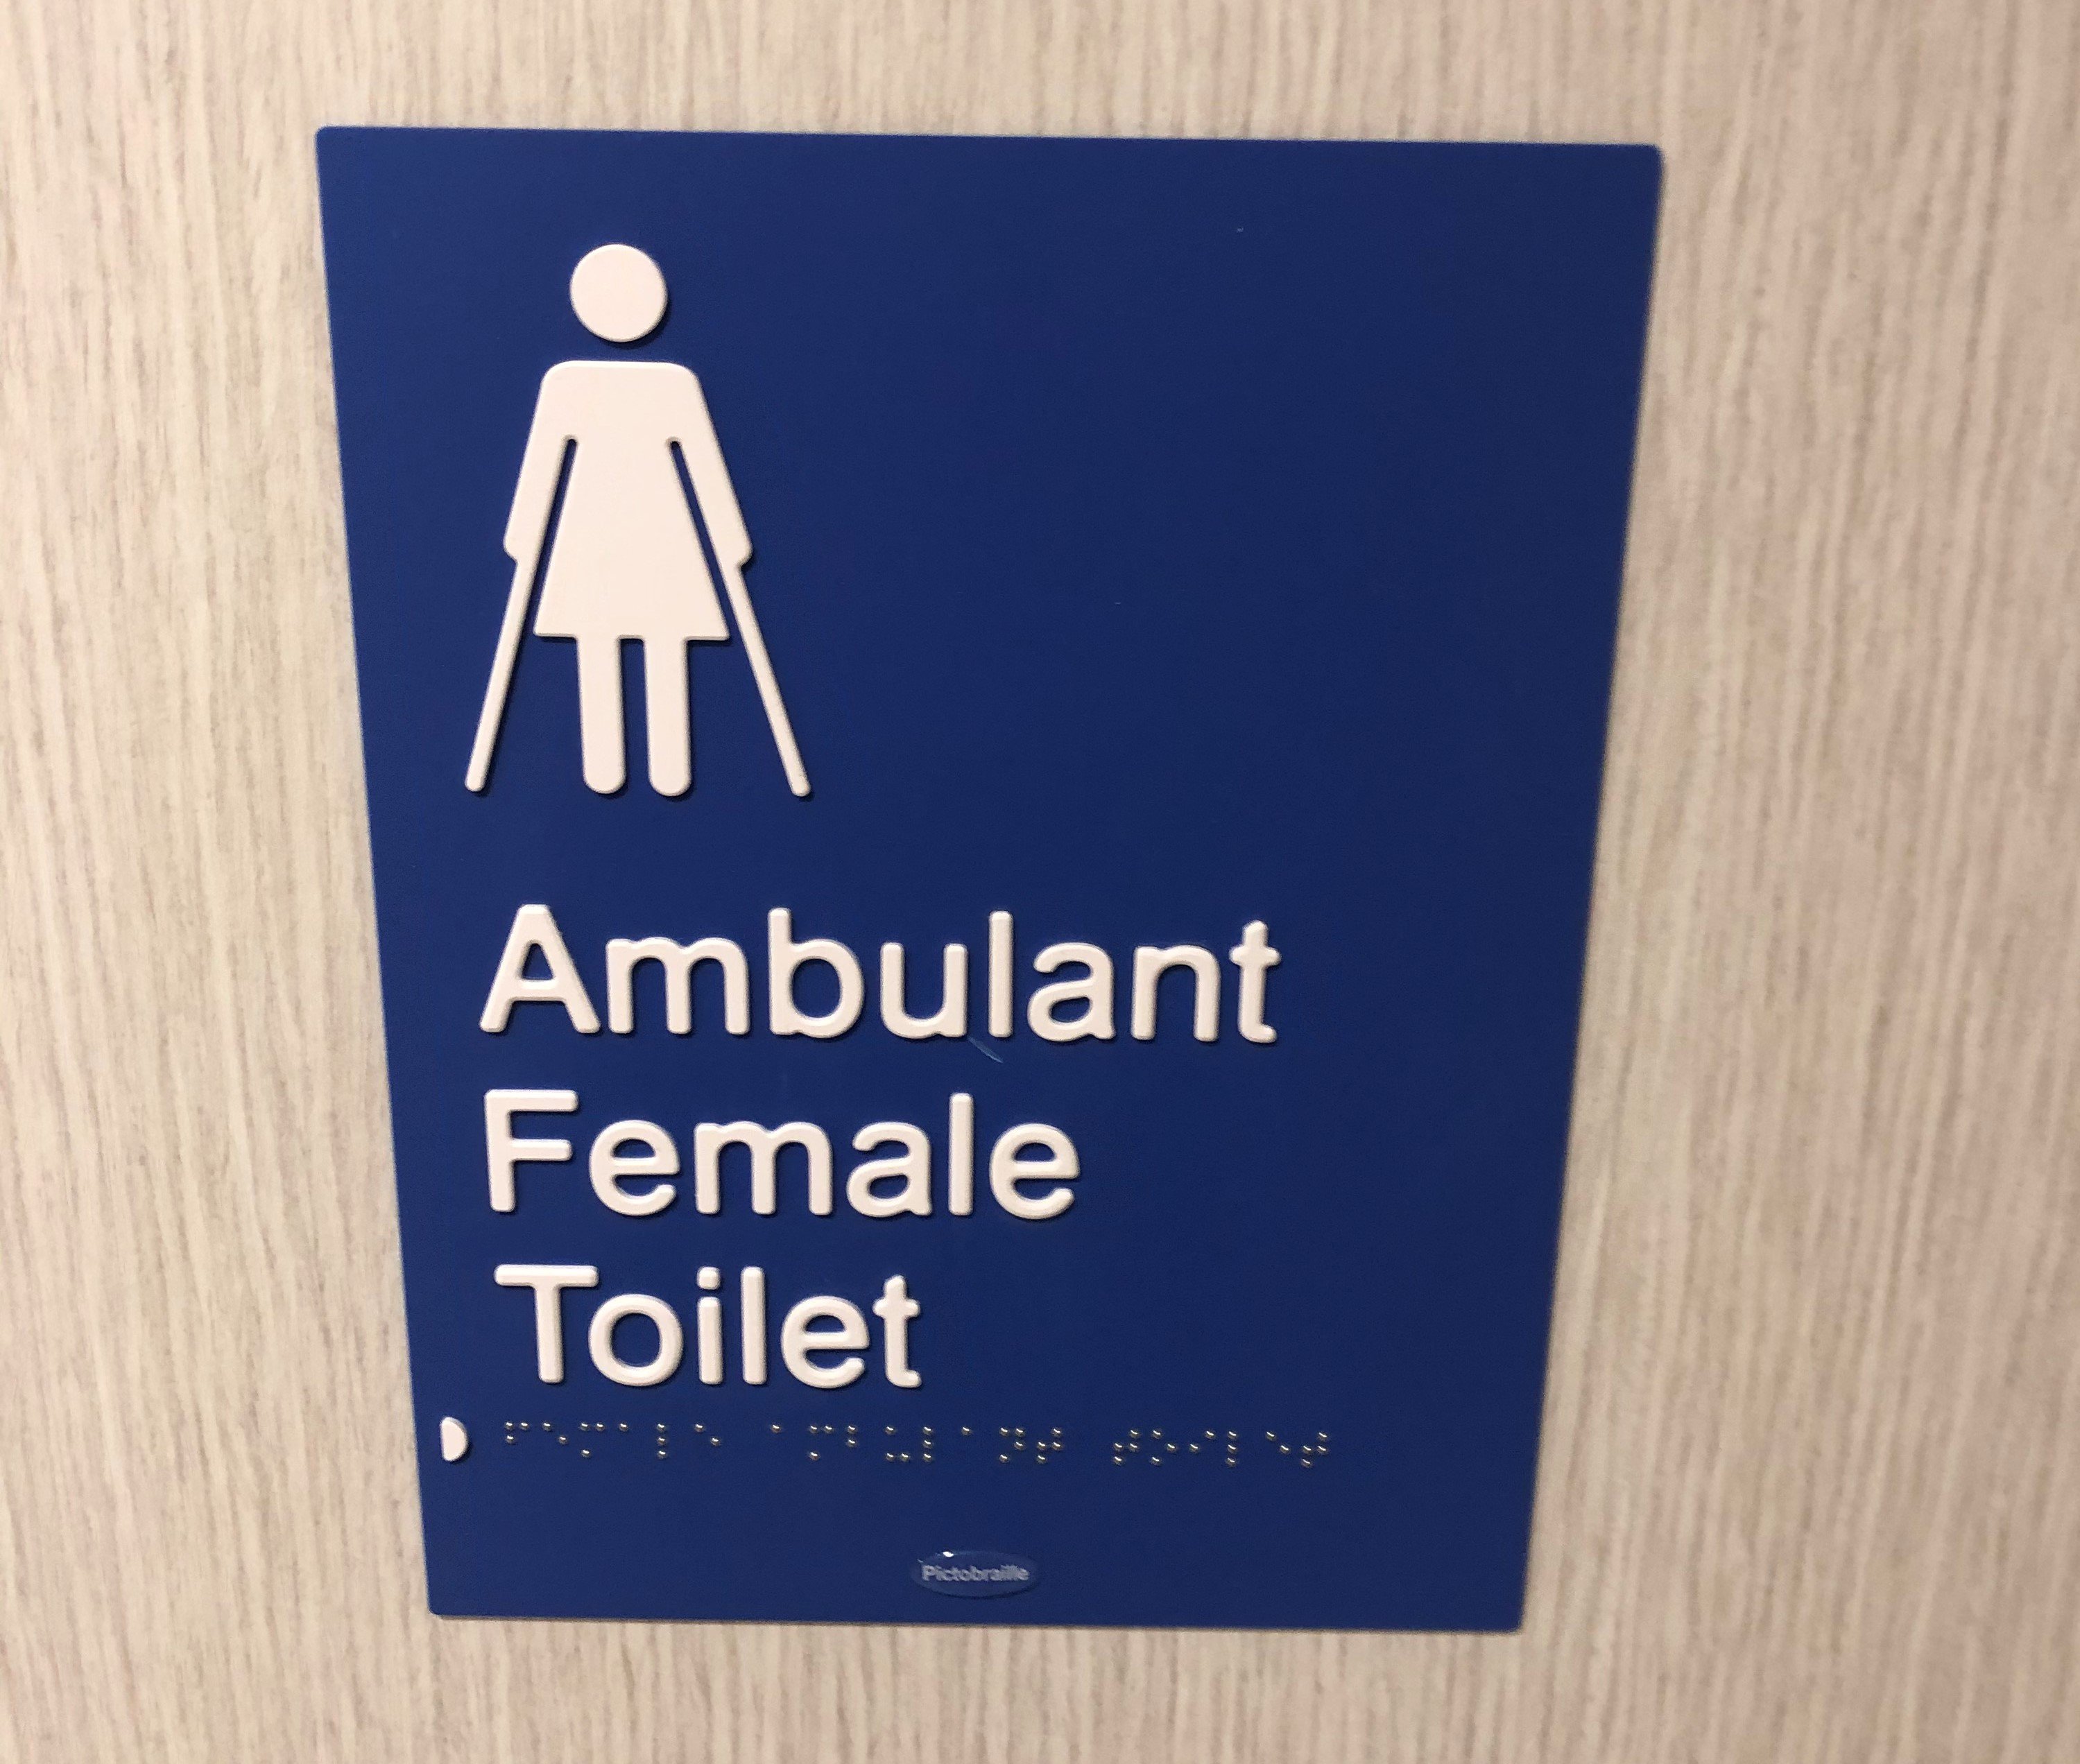 Airport disabled toilet sign